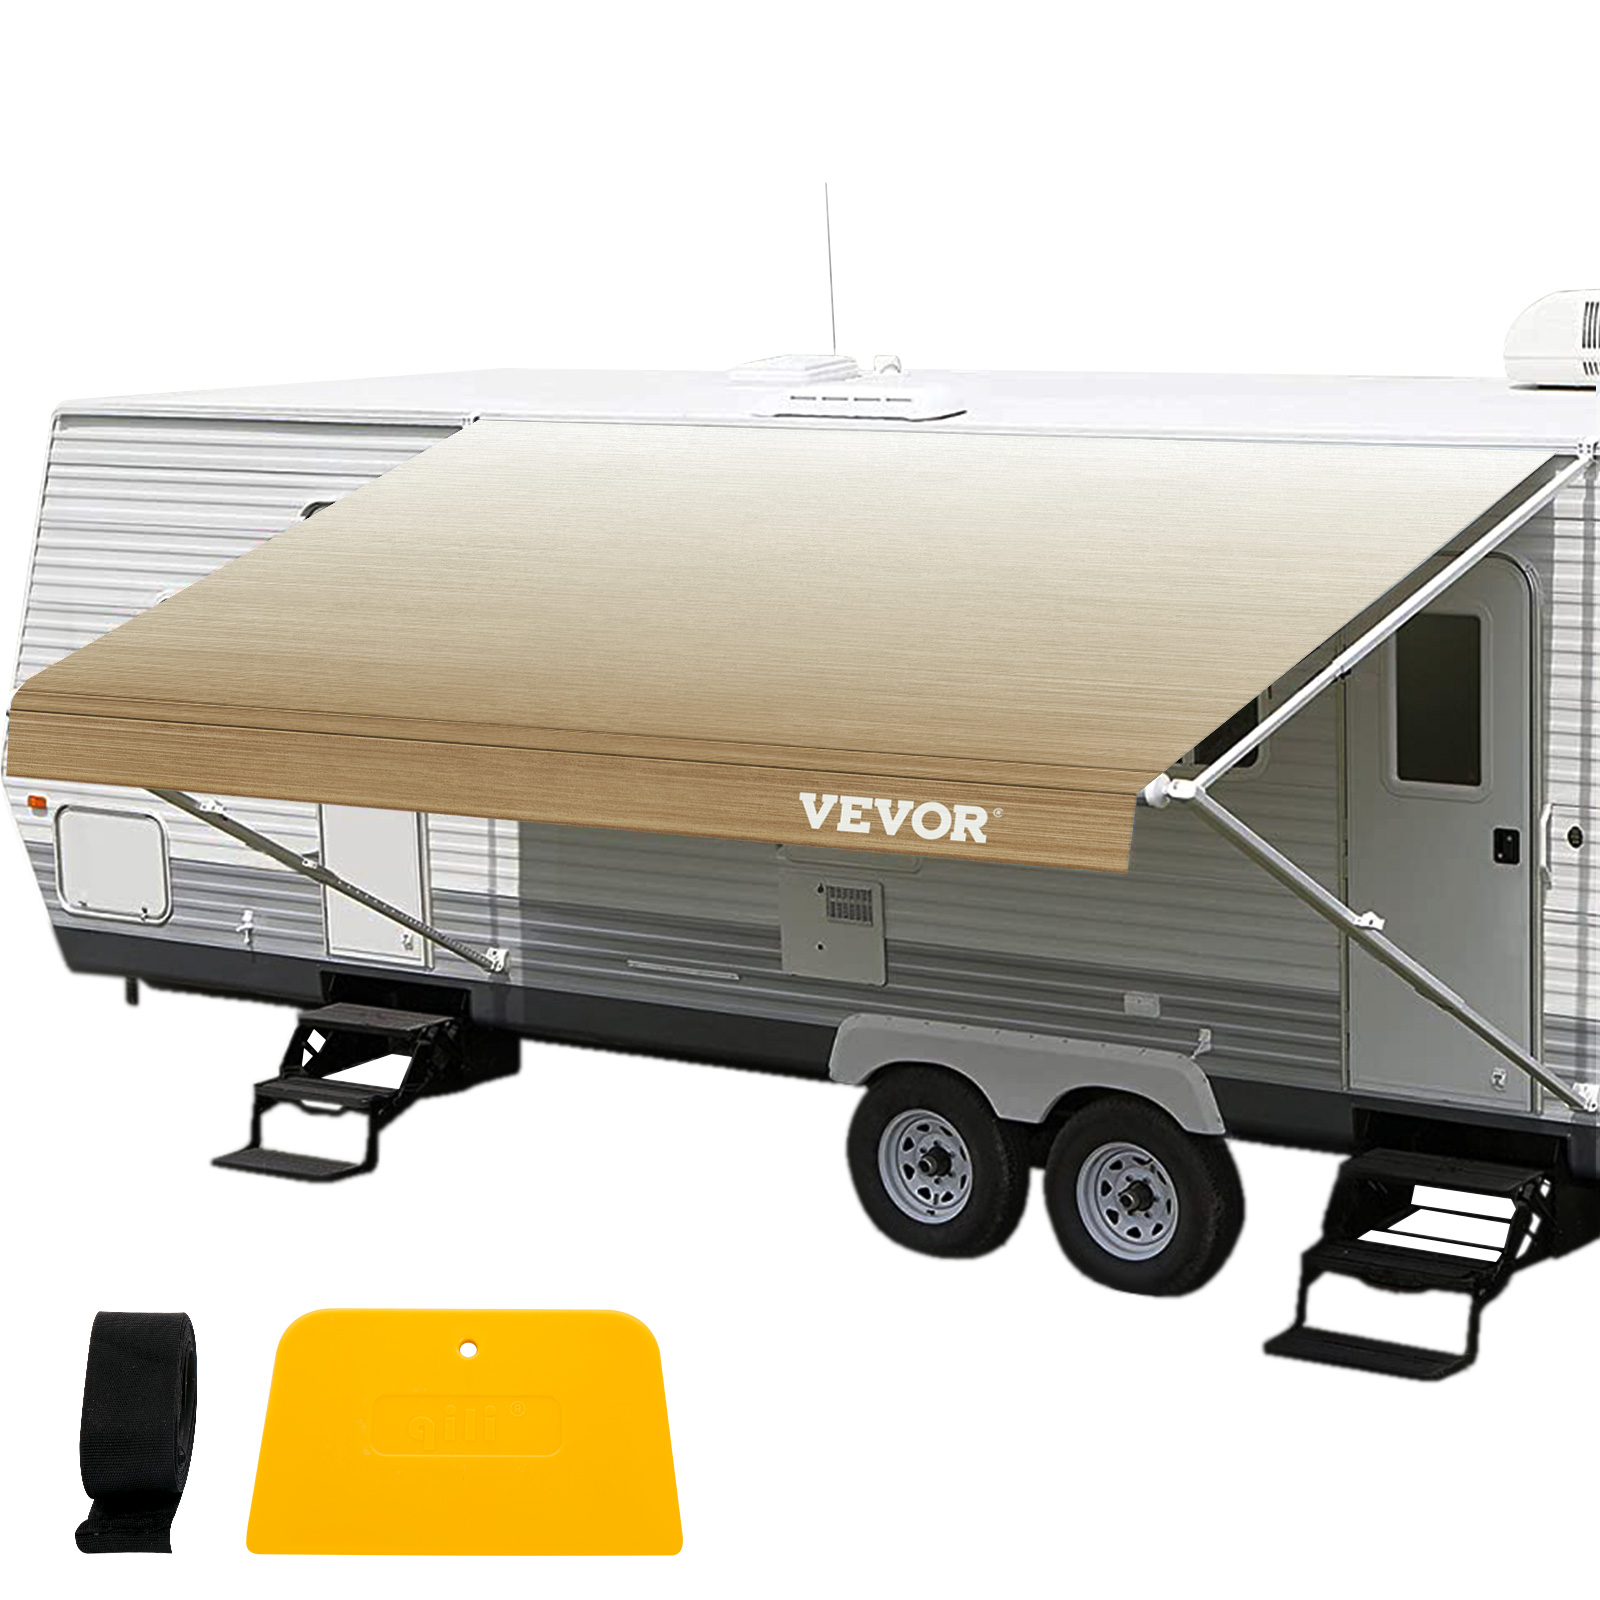 RV Awning,20ft,Brown Fade